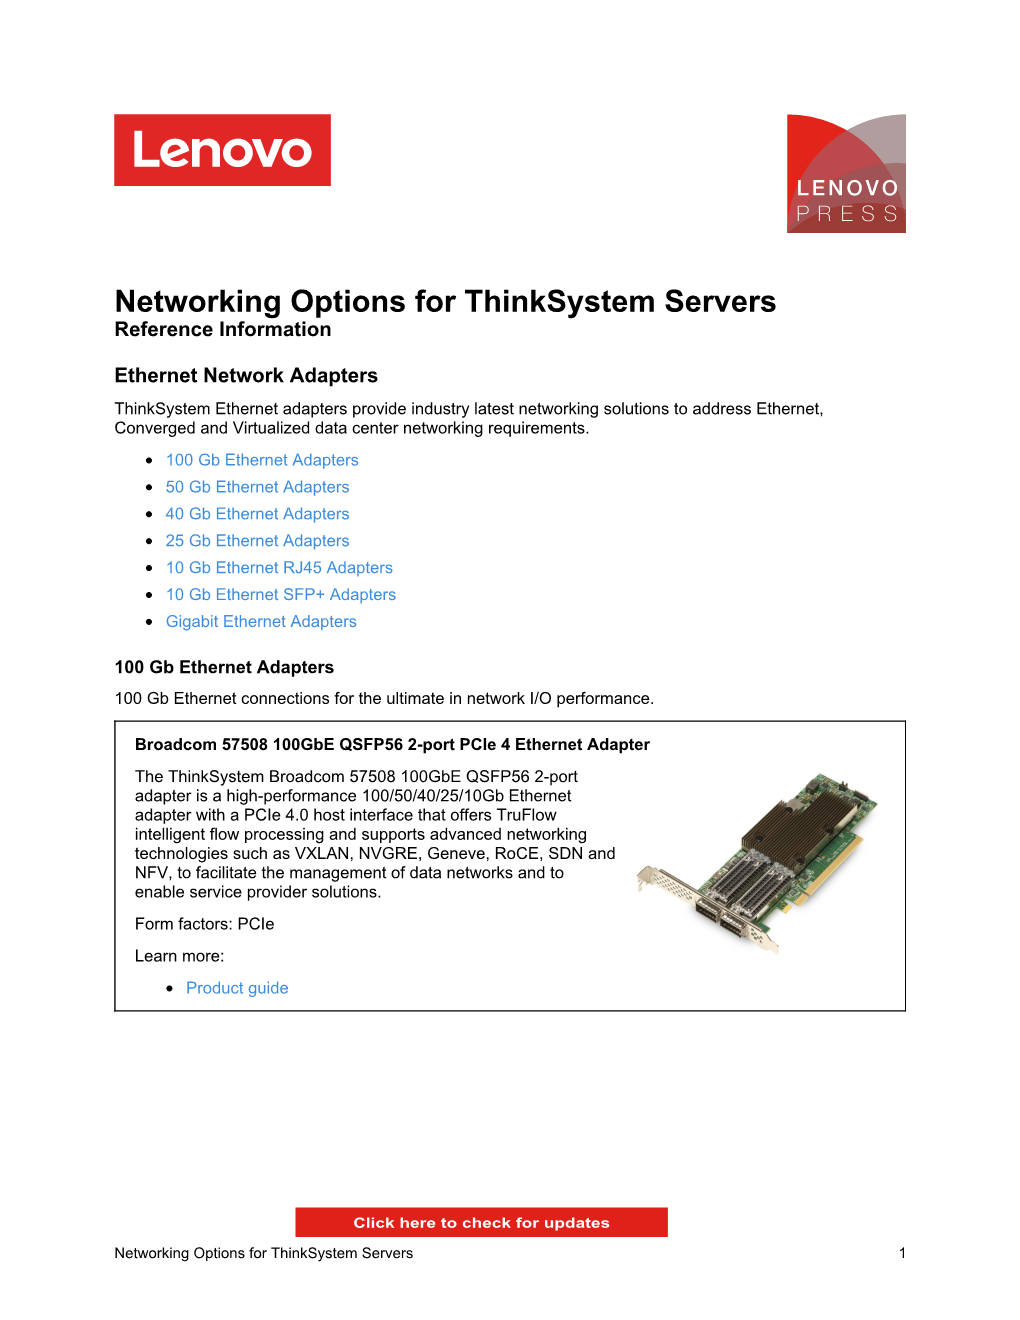 Networking Options for Thinksystem Servers Reference Information